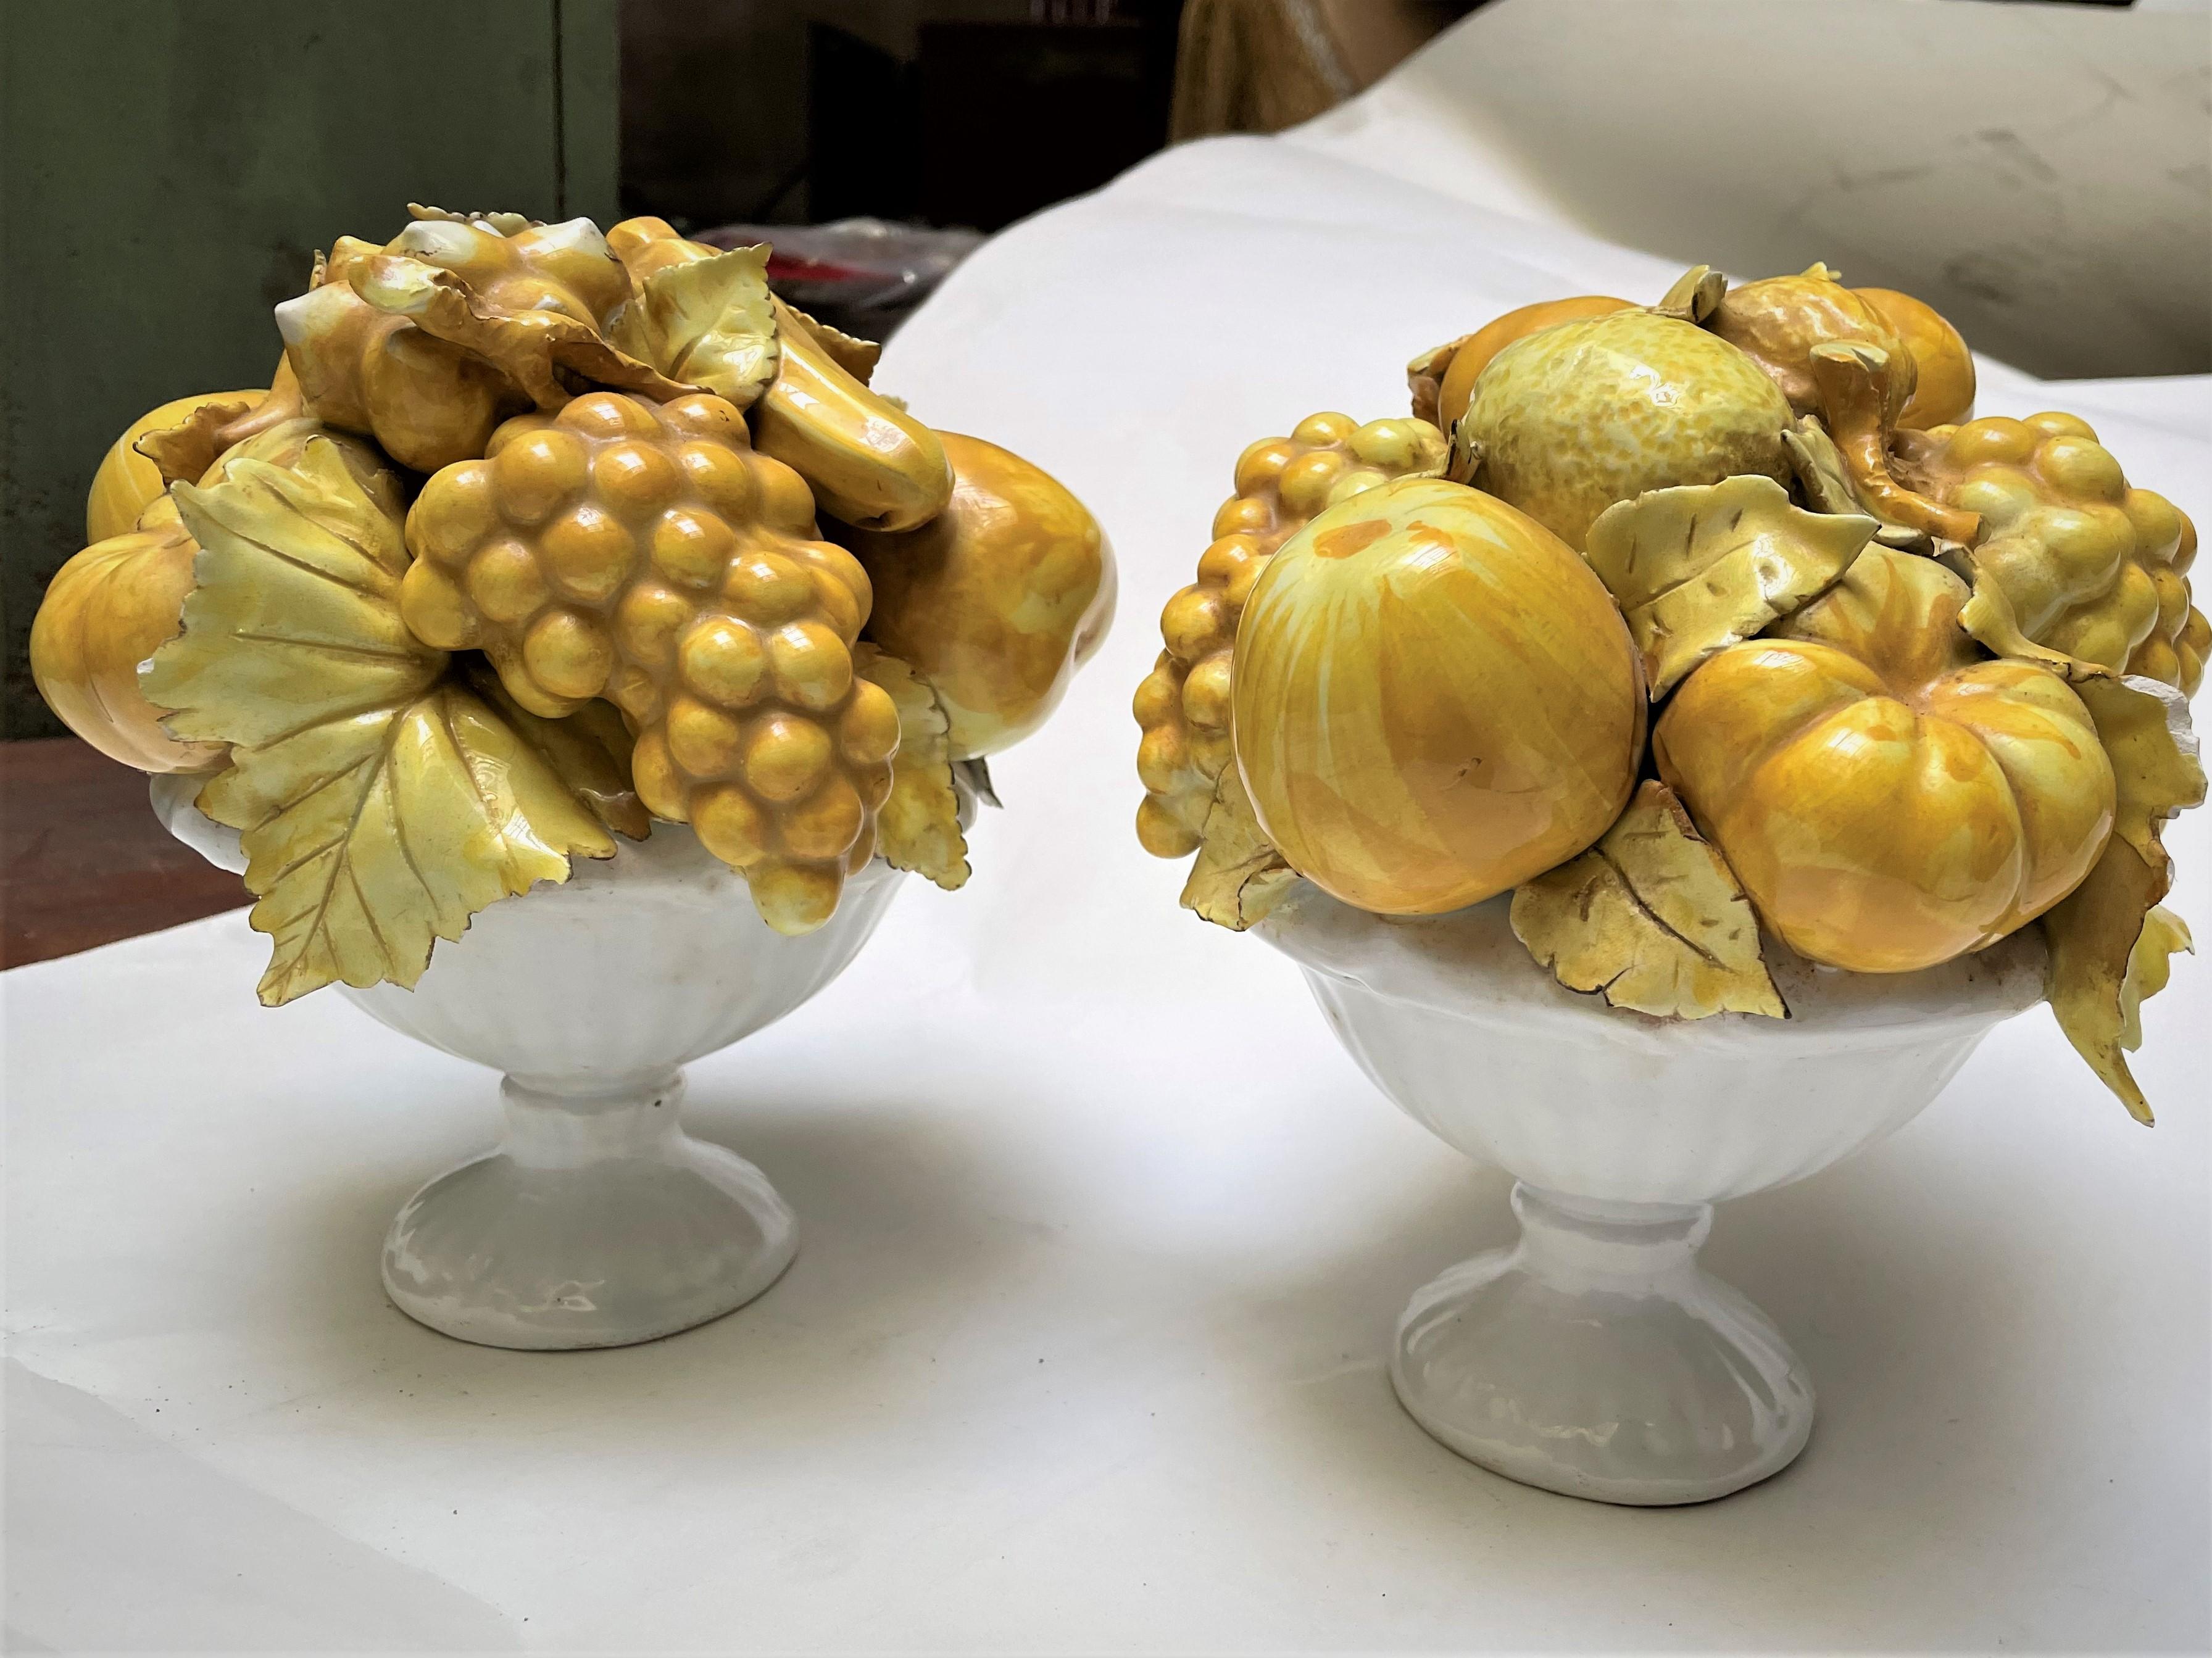 This is such a wonderfully designed pair of Italian ceramic white footed bowls full of realistic fruit that have been finished in a yellow glaze, making a bright and festive pair of centerpieces or decorative accessories. The neutral white and